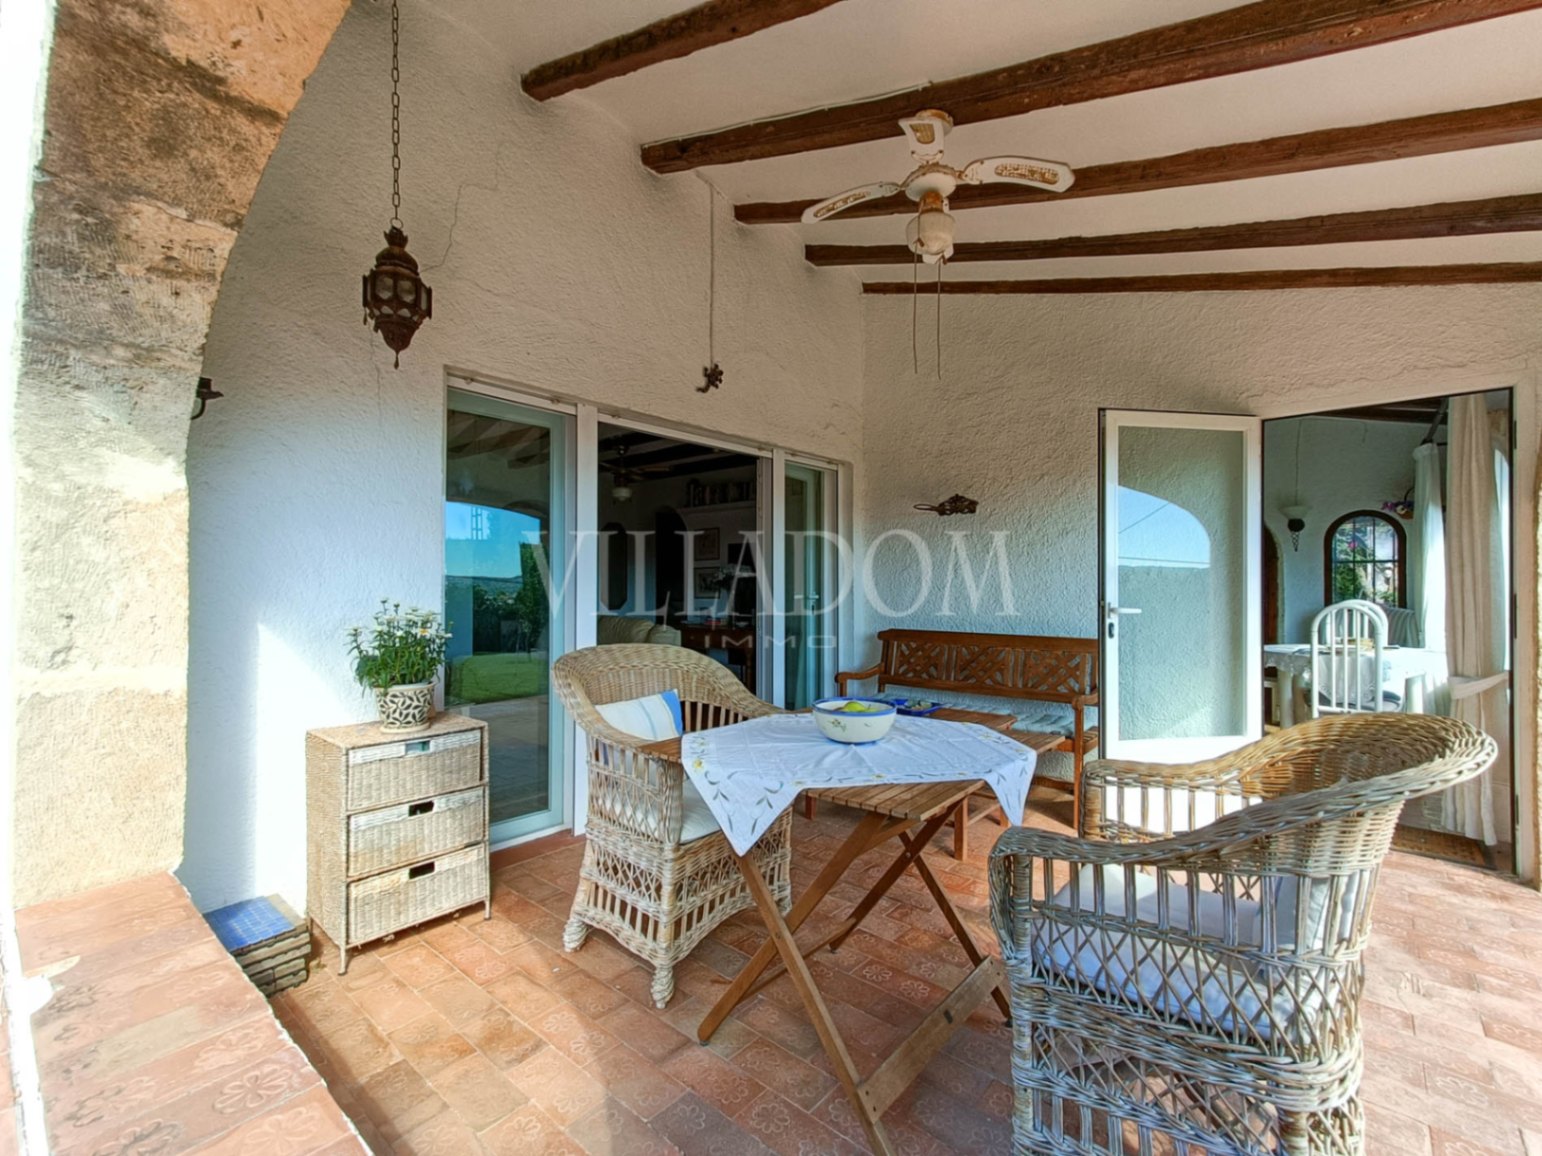 Charming finca for sale in Javea